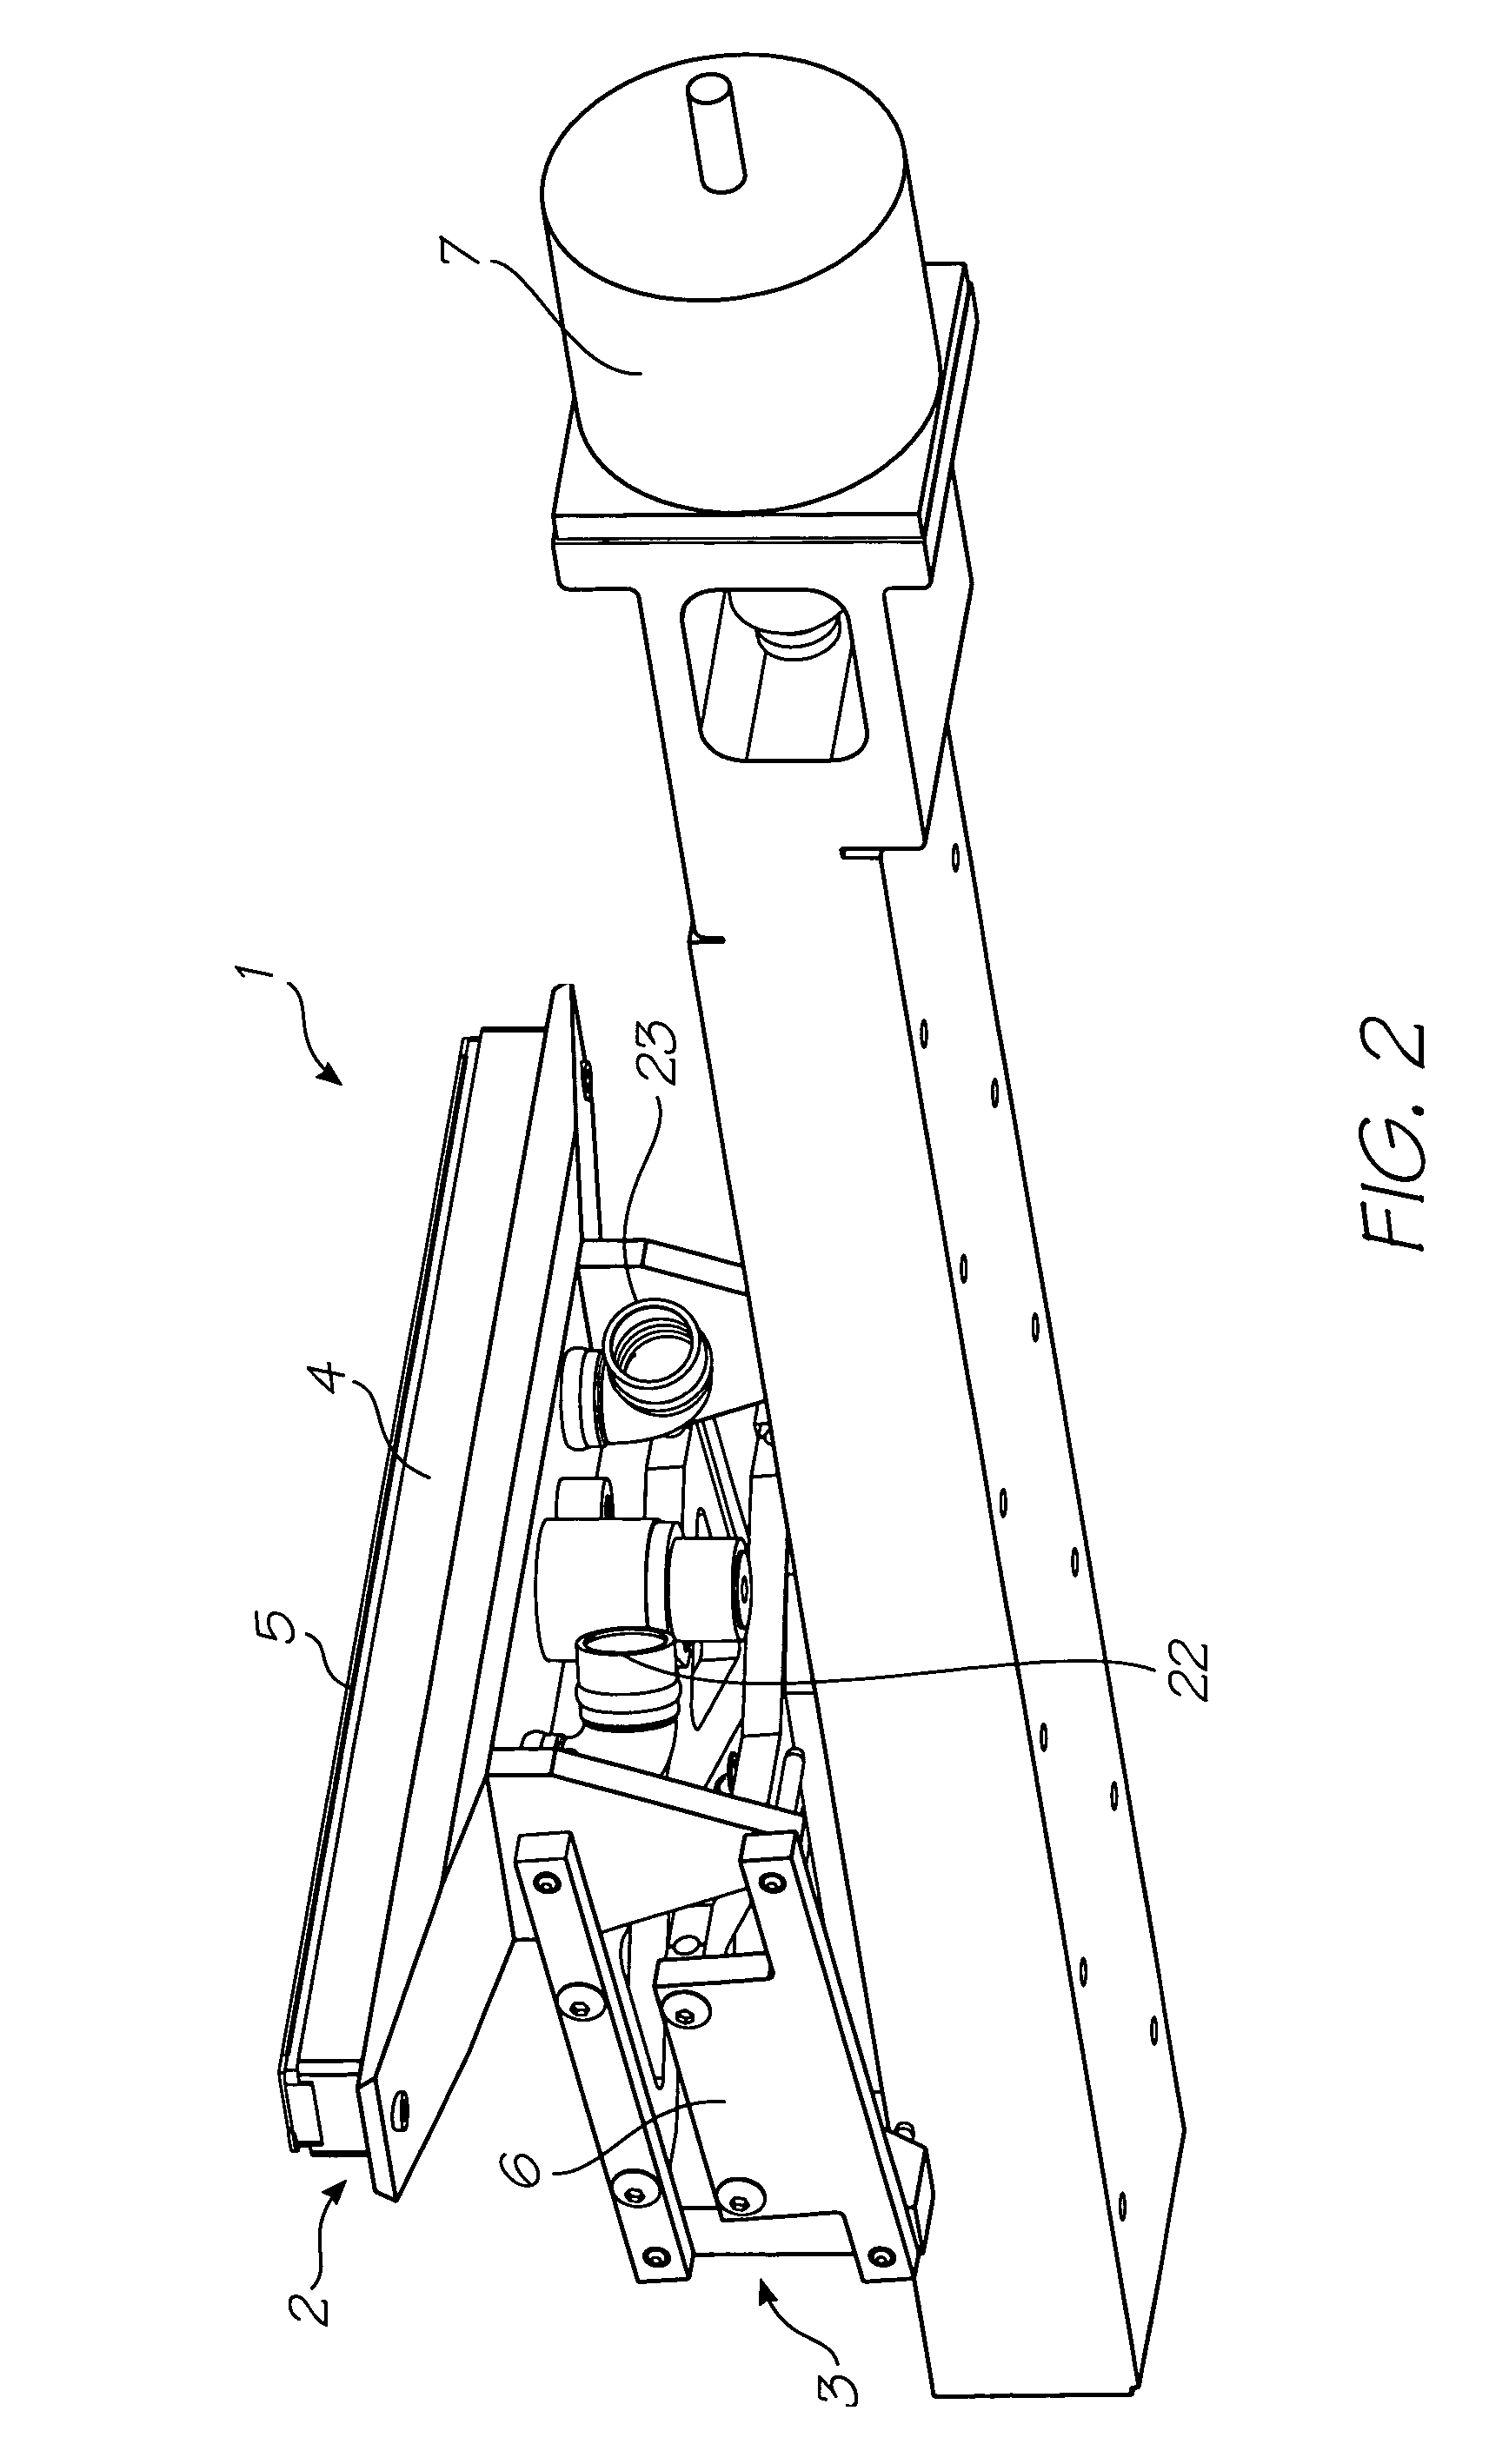 Method of maintaining a printhead using maintenance station configured for air blast cleaning